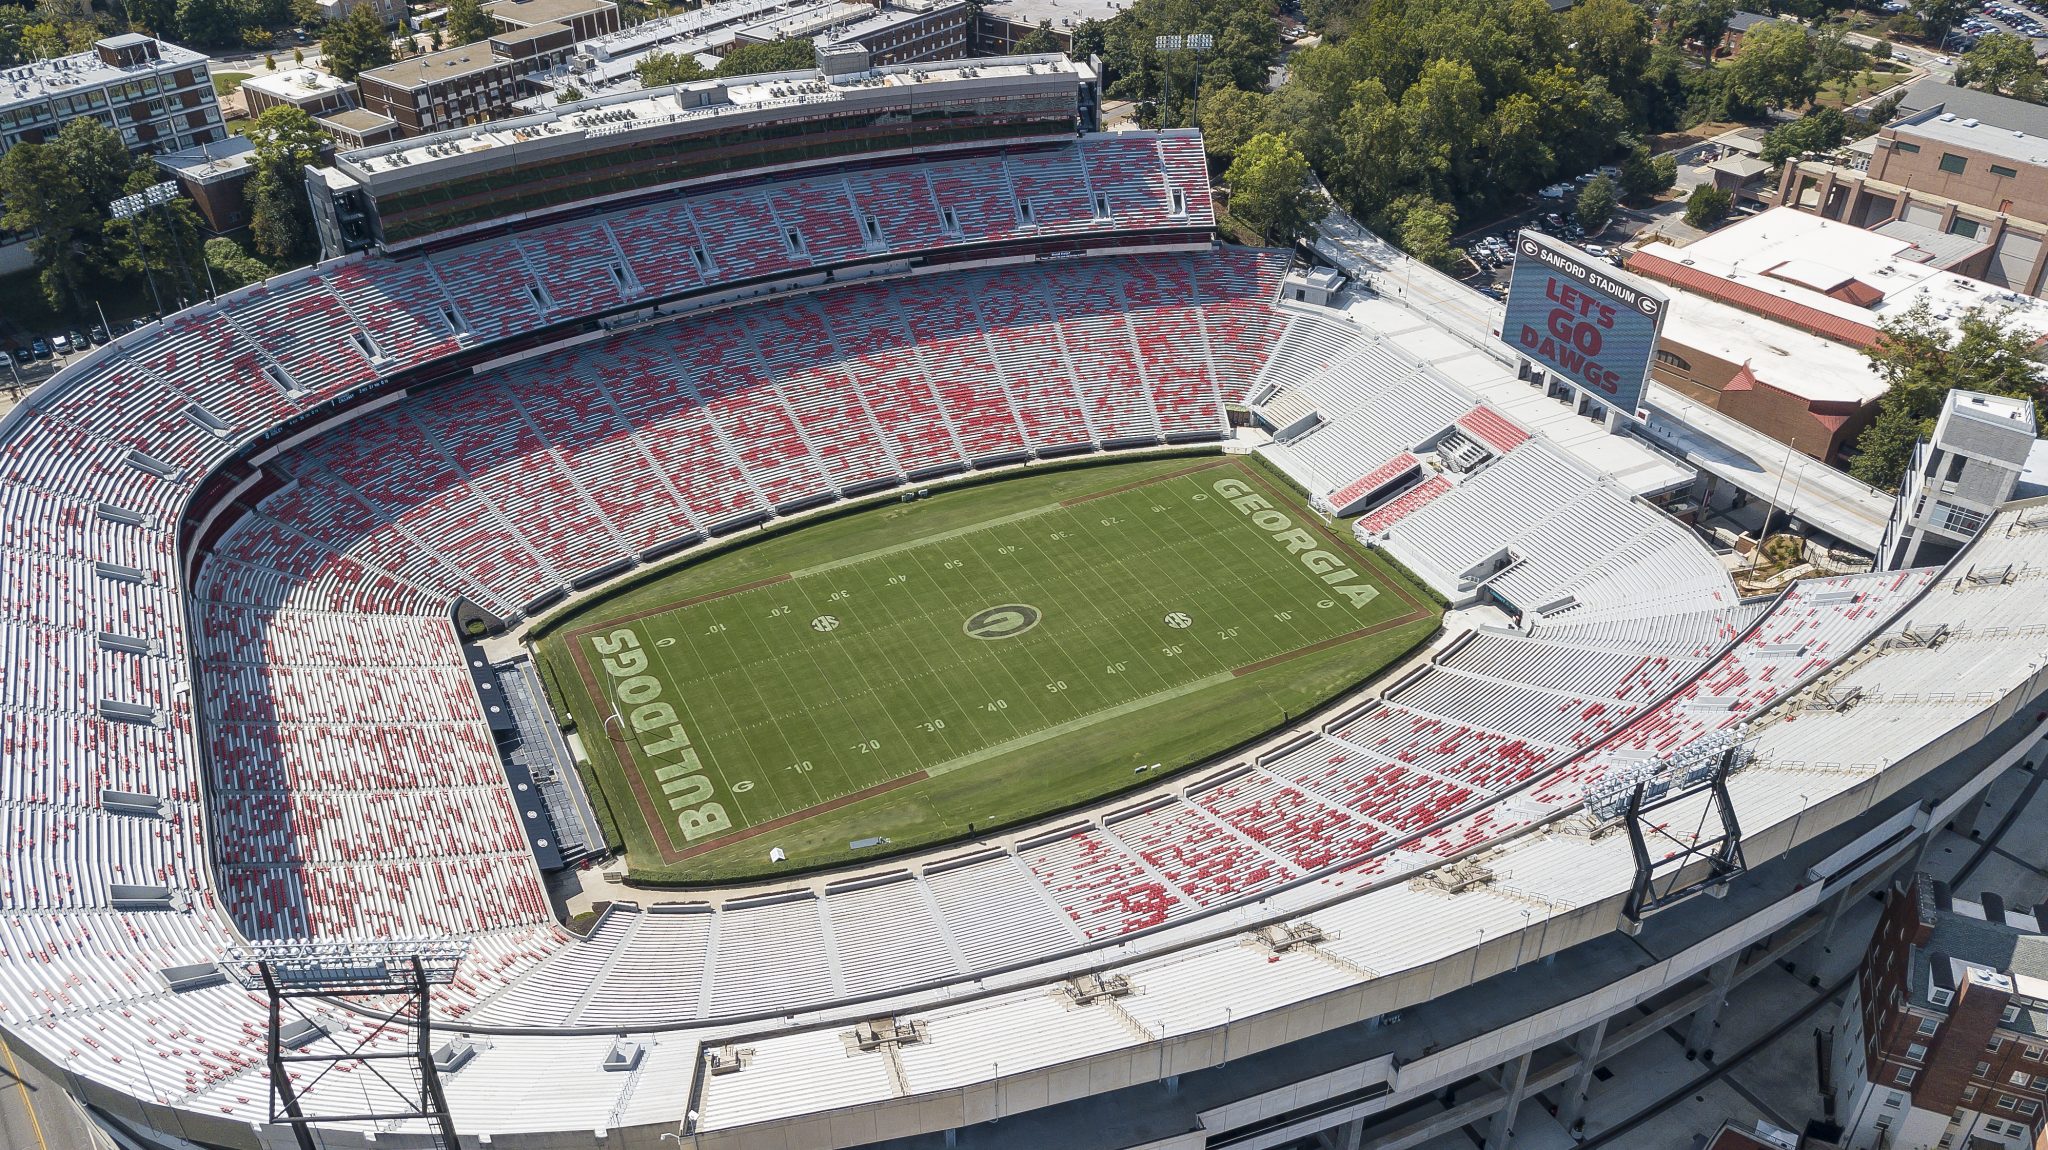 October 03, 2018 - Athens, Georgia, USA: Aerial views of Sanford Stadium, which is the on-campus playing venue for football at the University of Georgia in Athens, Georgia, United States.